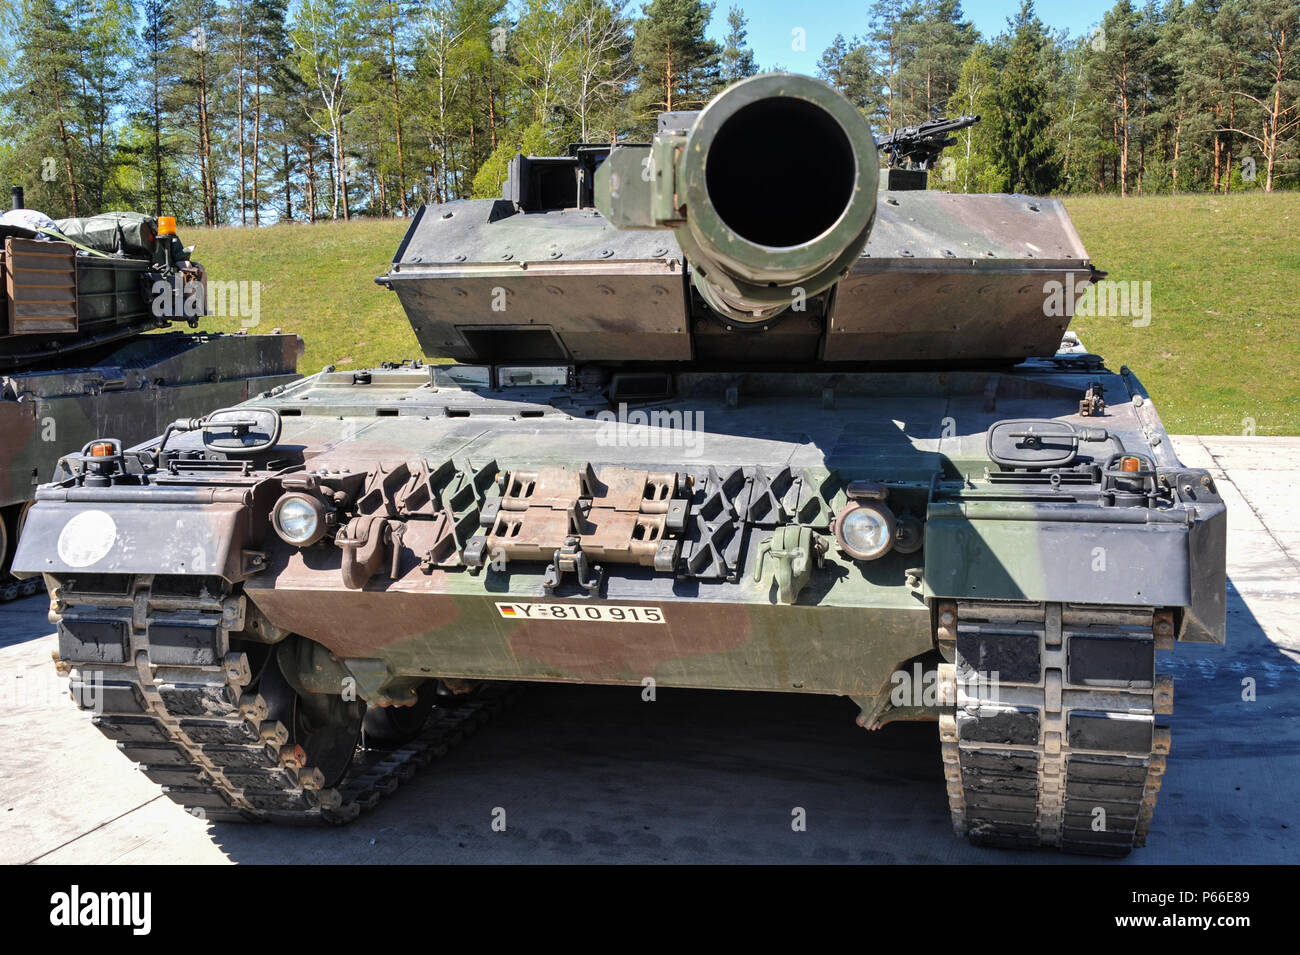 Picture shows a German Army Leopard 2A6 participating in the Strong Europe Tank Challenge (SETC), May 08, 2016 at Grafenwoehr Training Area, Germany. The SETC is co-hosted by U.S. Army Europe and the German Bundeswehr May 10-13, 2016. The competition is designed to foster military partnership while promoting NATO interoperability. Seven platoons from six NATO nations are competing in SETC - the first multinational tank challenge at Grafenwoehr in 25 years. For more photos, videos and stories from the Strong Europe Tank Challenge, go to http://www.eur.army.mil/tankchallenge/ (U.S. Army photo by Stock Photo